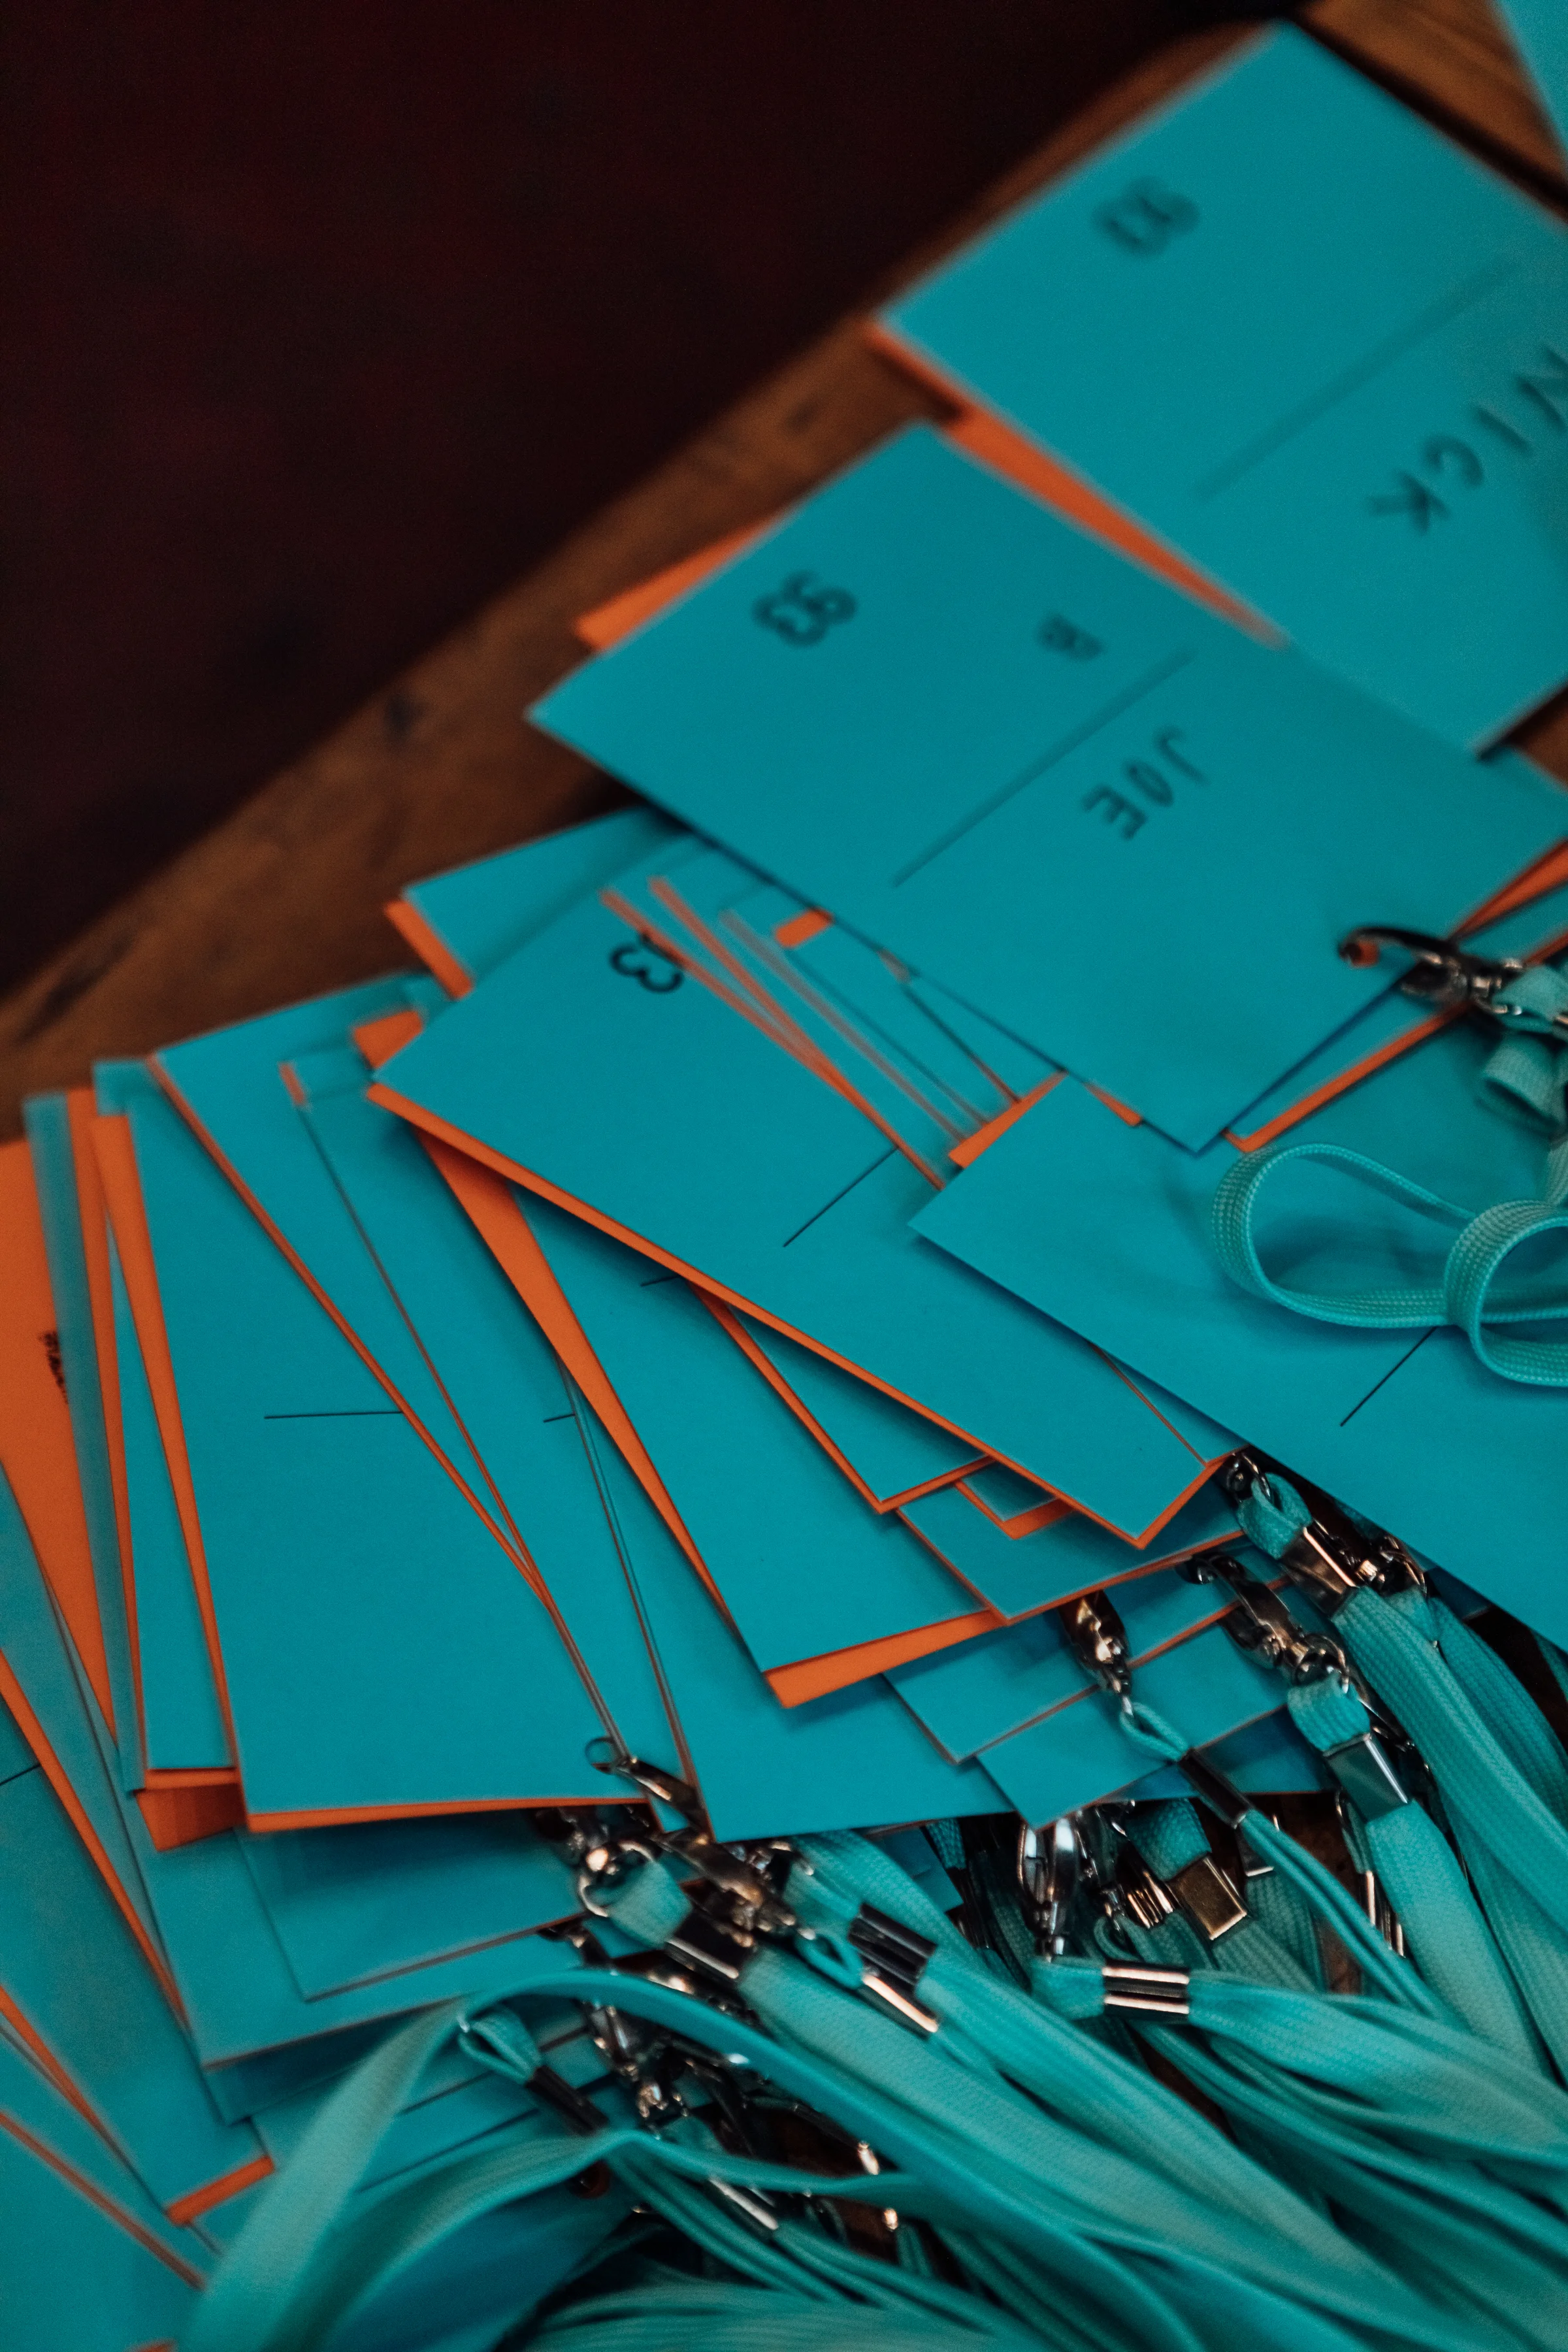 A pile of custom designed and printed GF Smith Colorplan lanyards for the 93 Features Marketing for growth event.